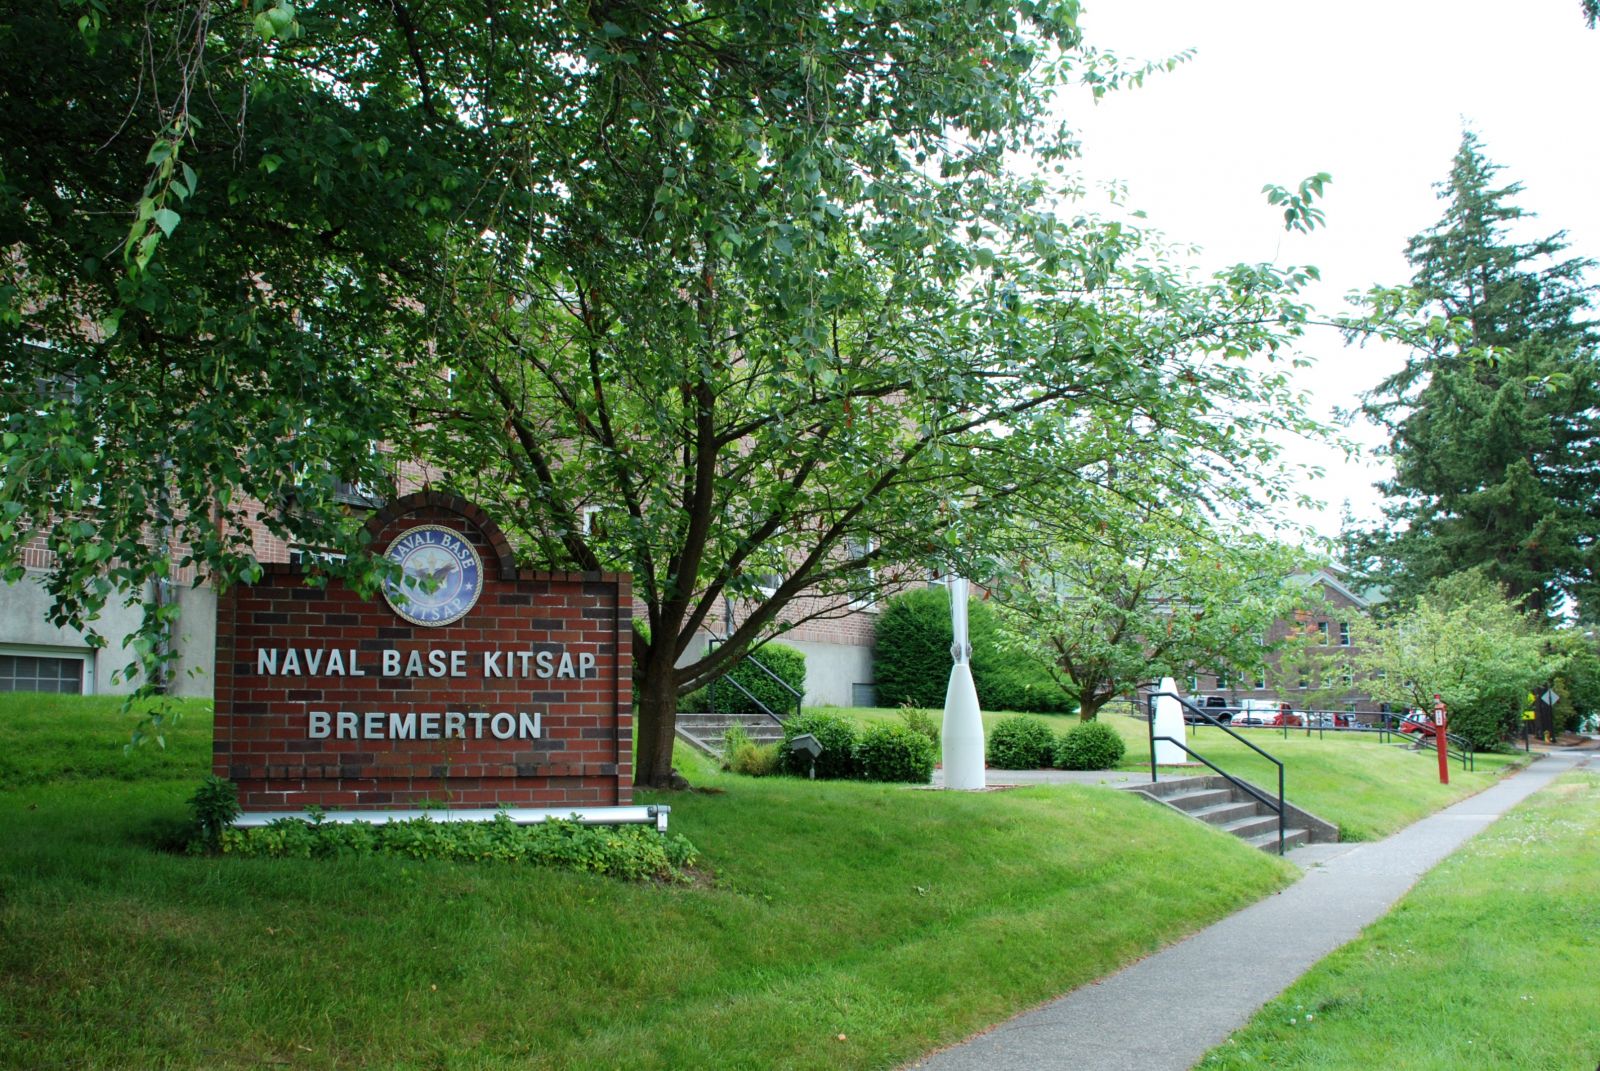 Bremerton Naval Station Homes For Sale and Rent